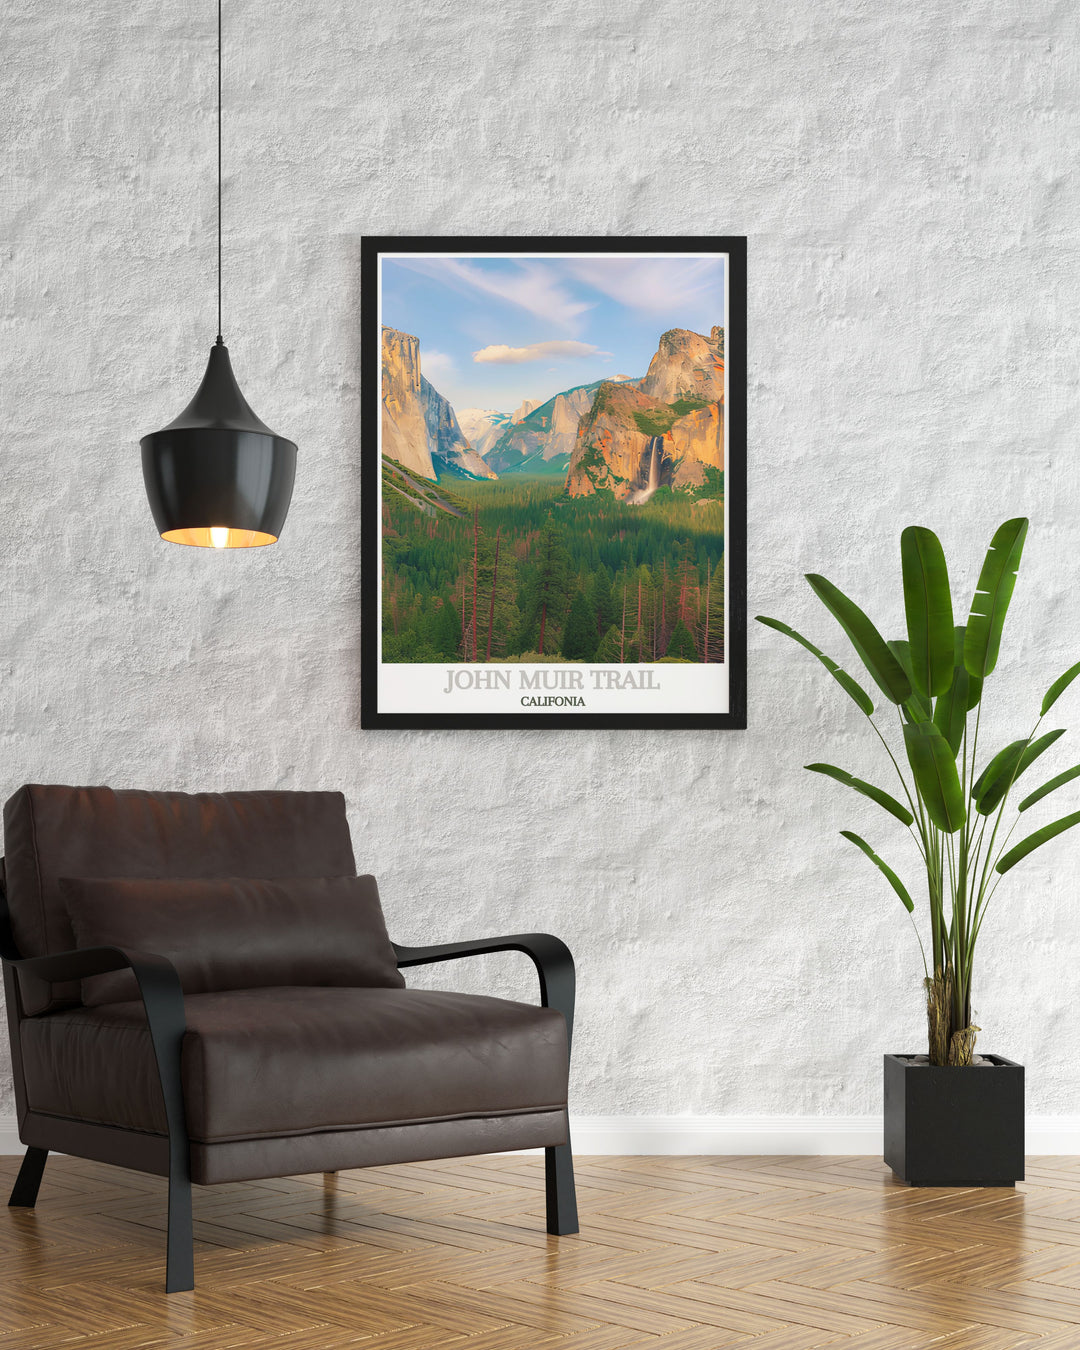 Showcasing the historical richness of the John Muir Trail, this travel poster features iconic landmarks and natural sites. Ideal for history enthusiasts, this piece brings the fascinating history of the trail into your home.